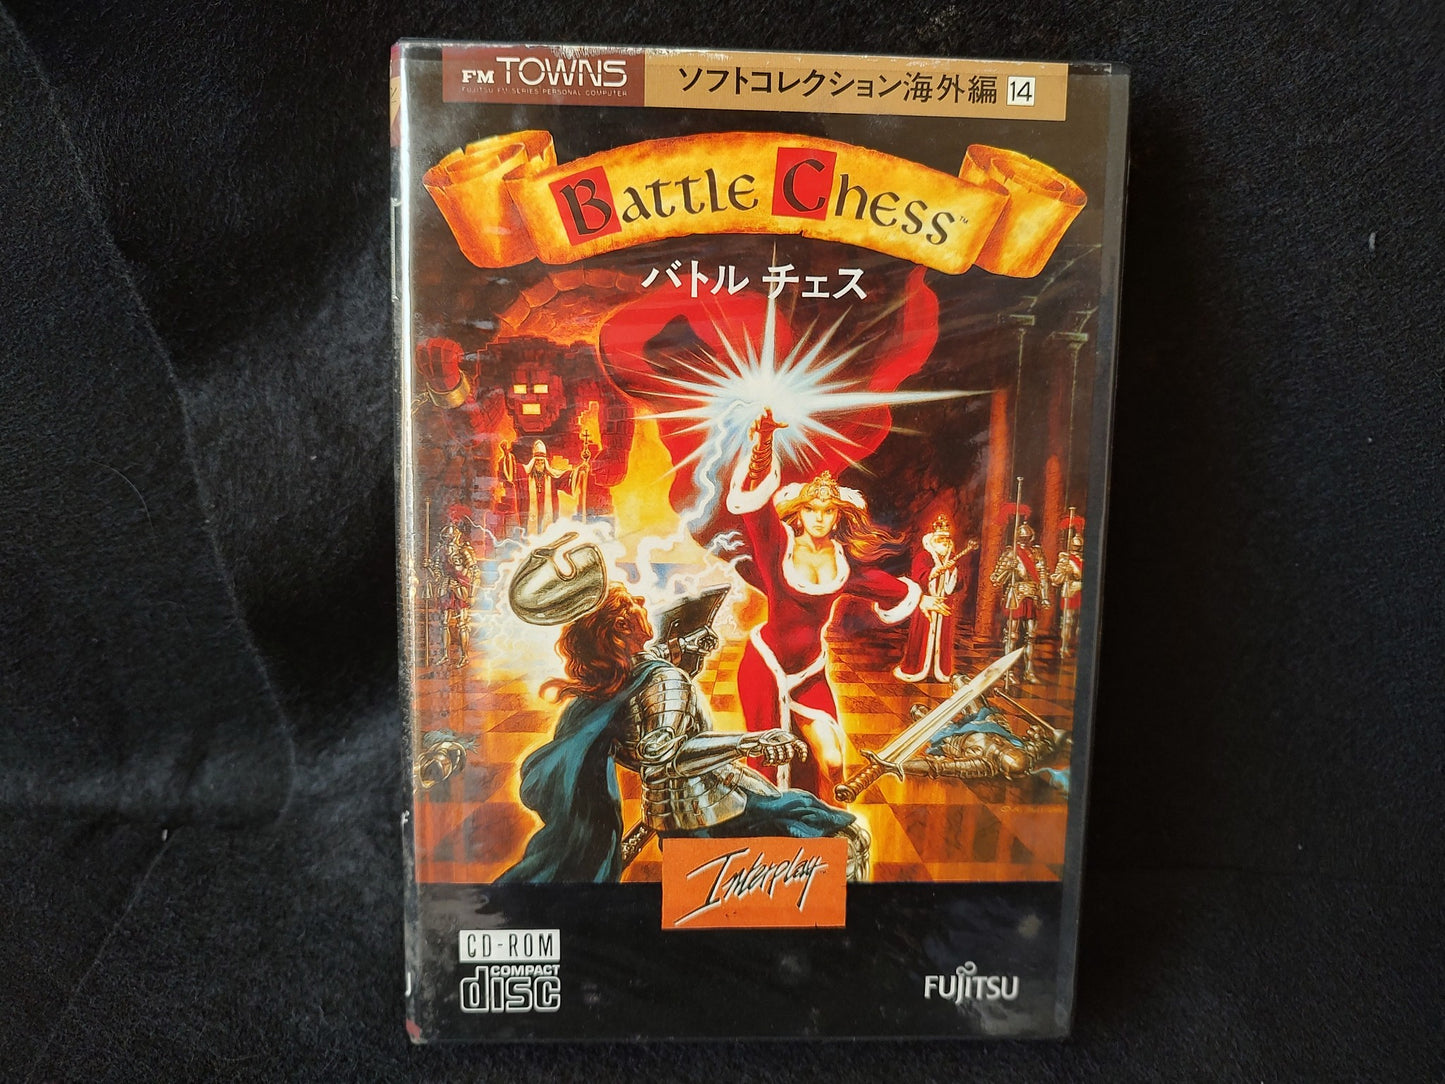 Battle Chess FM TOWNS Marty Game w/Manual, Box set, Working-f1026-